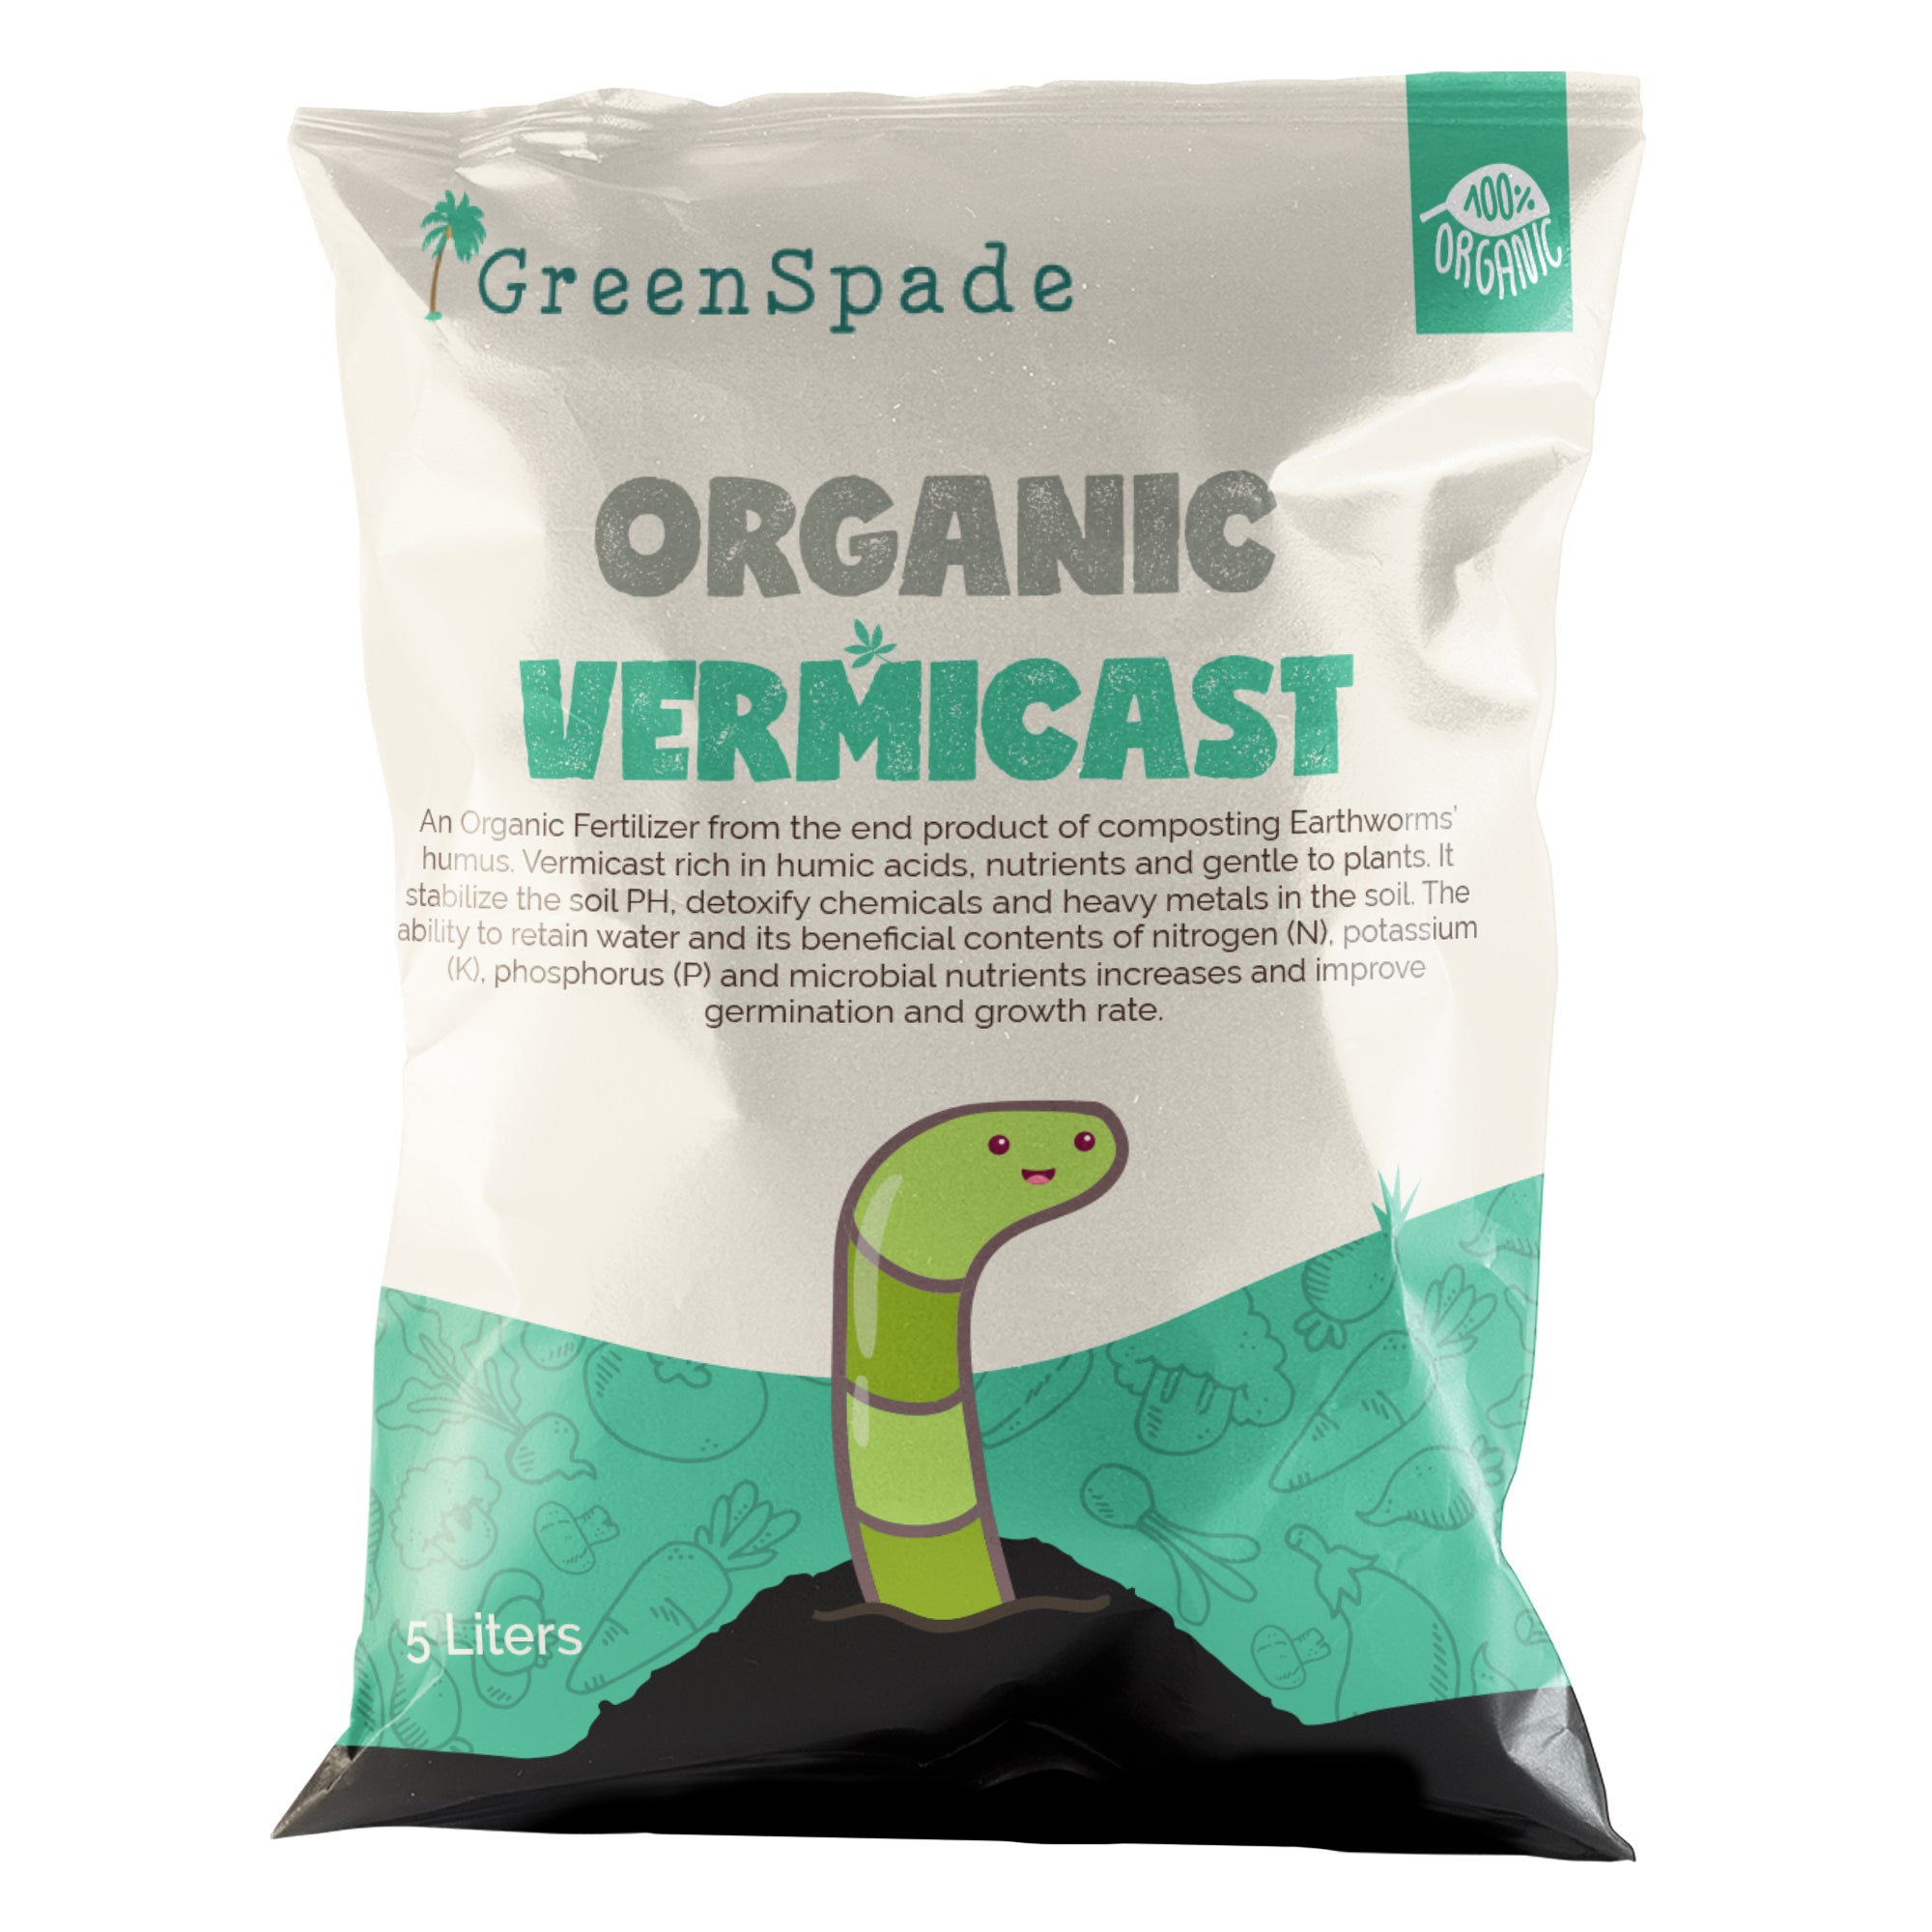 TGCSG Organic Vermicast | Purchase at The Green Collective